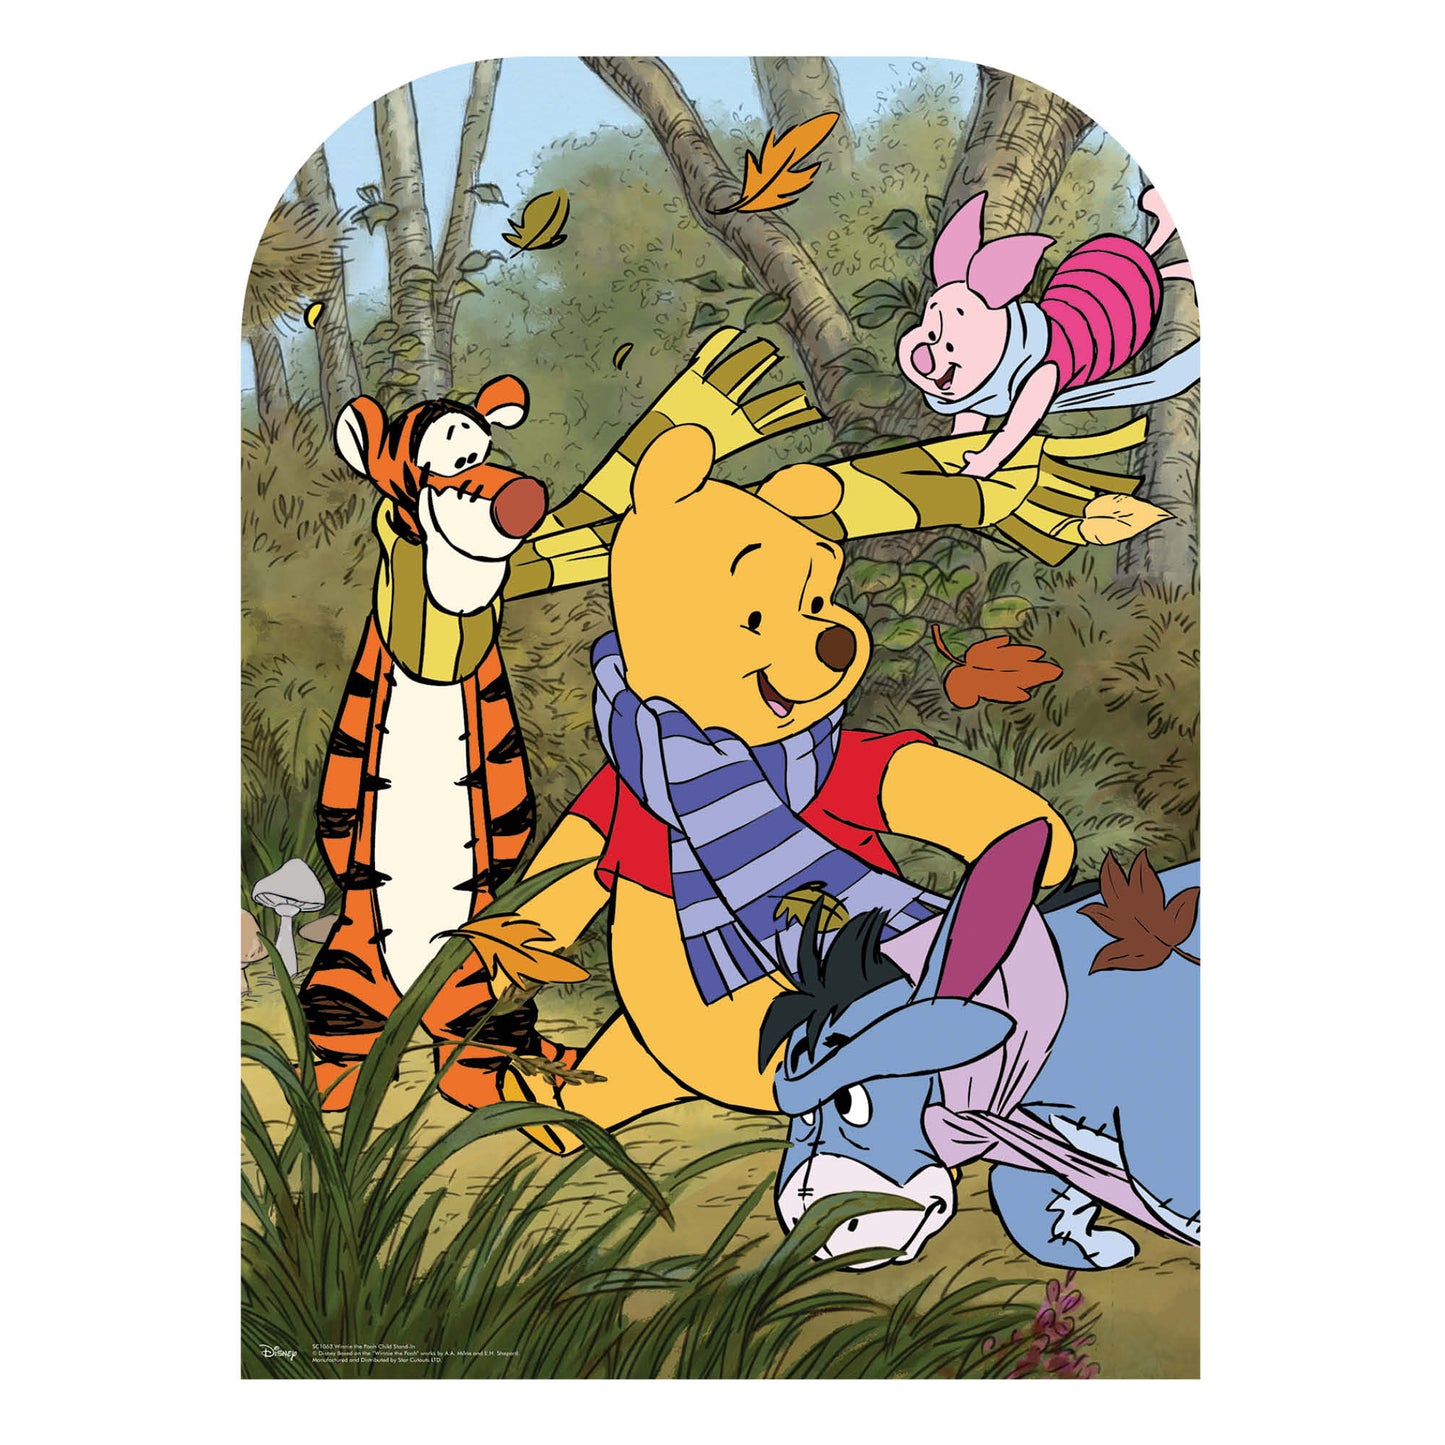 SC1063 Winnie the Pooh Hundred Acre Wood With Friends Stand-in Cardboard Cut Out Height 131cm